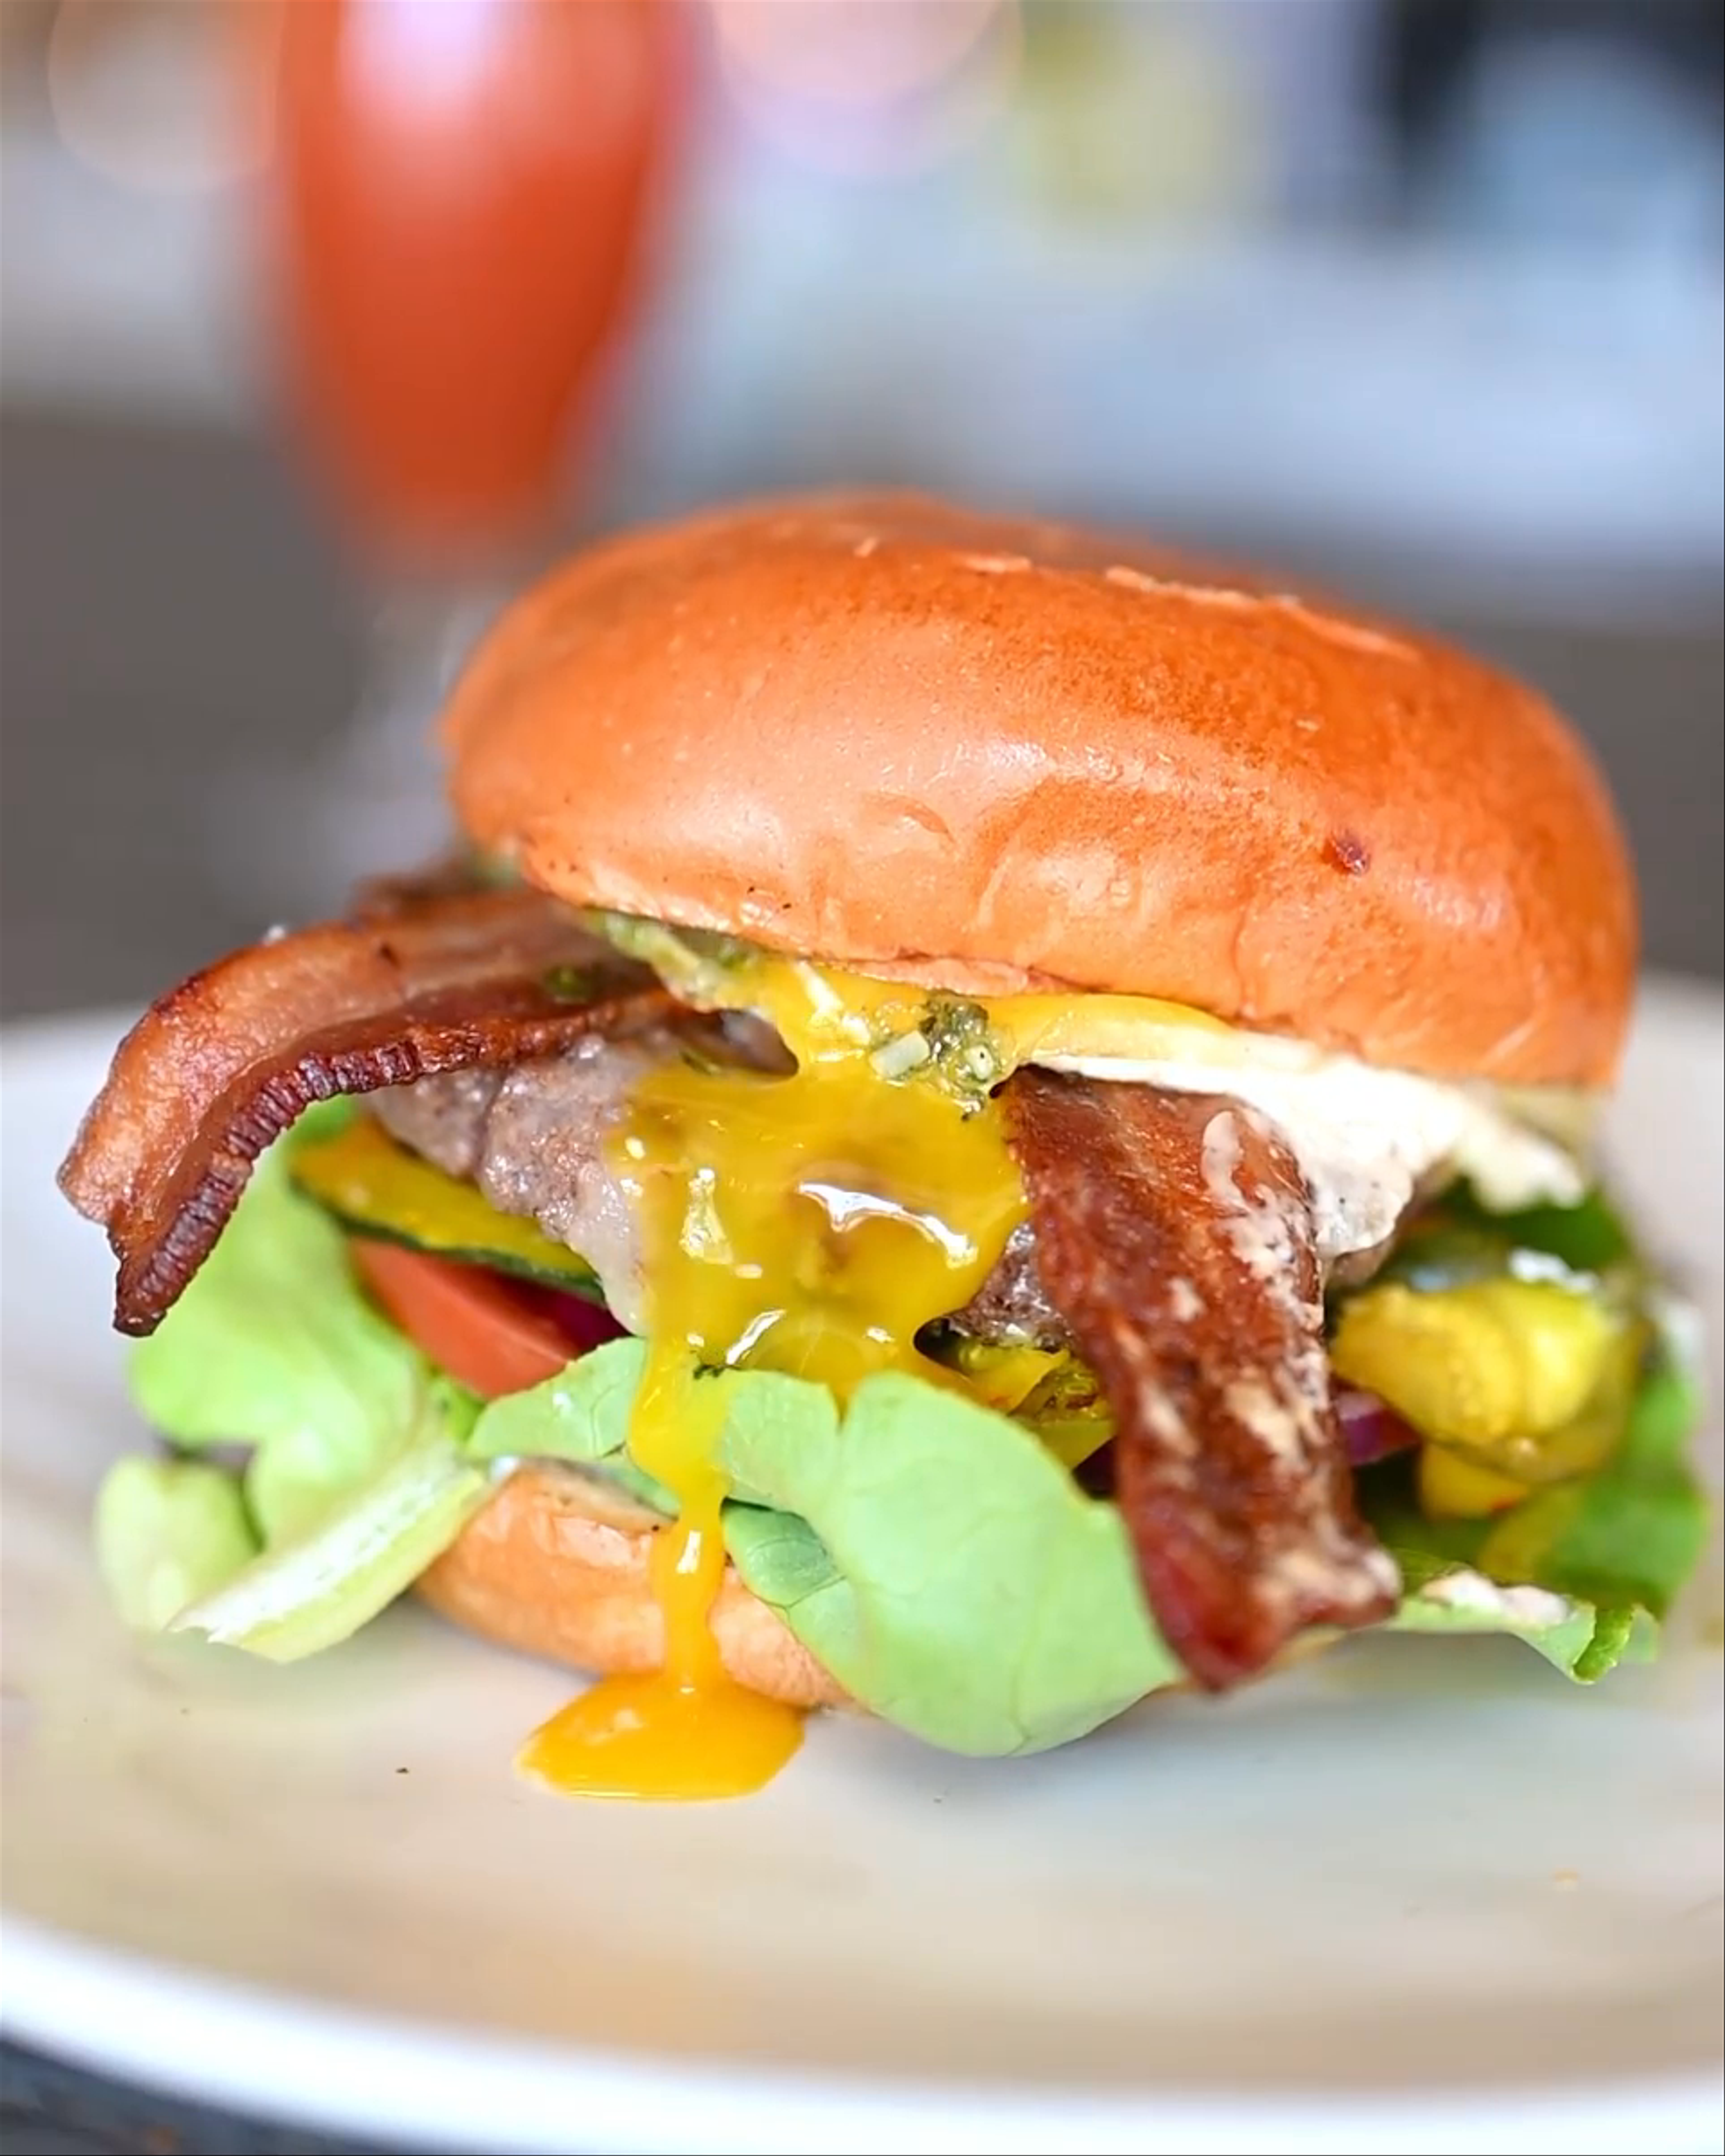 SUNRISE BURGER dish at Greenleaf Kitchen and Cocktails in Venice